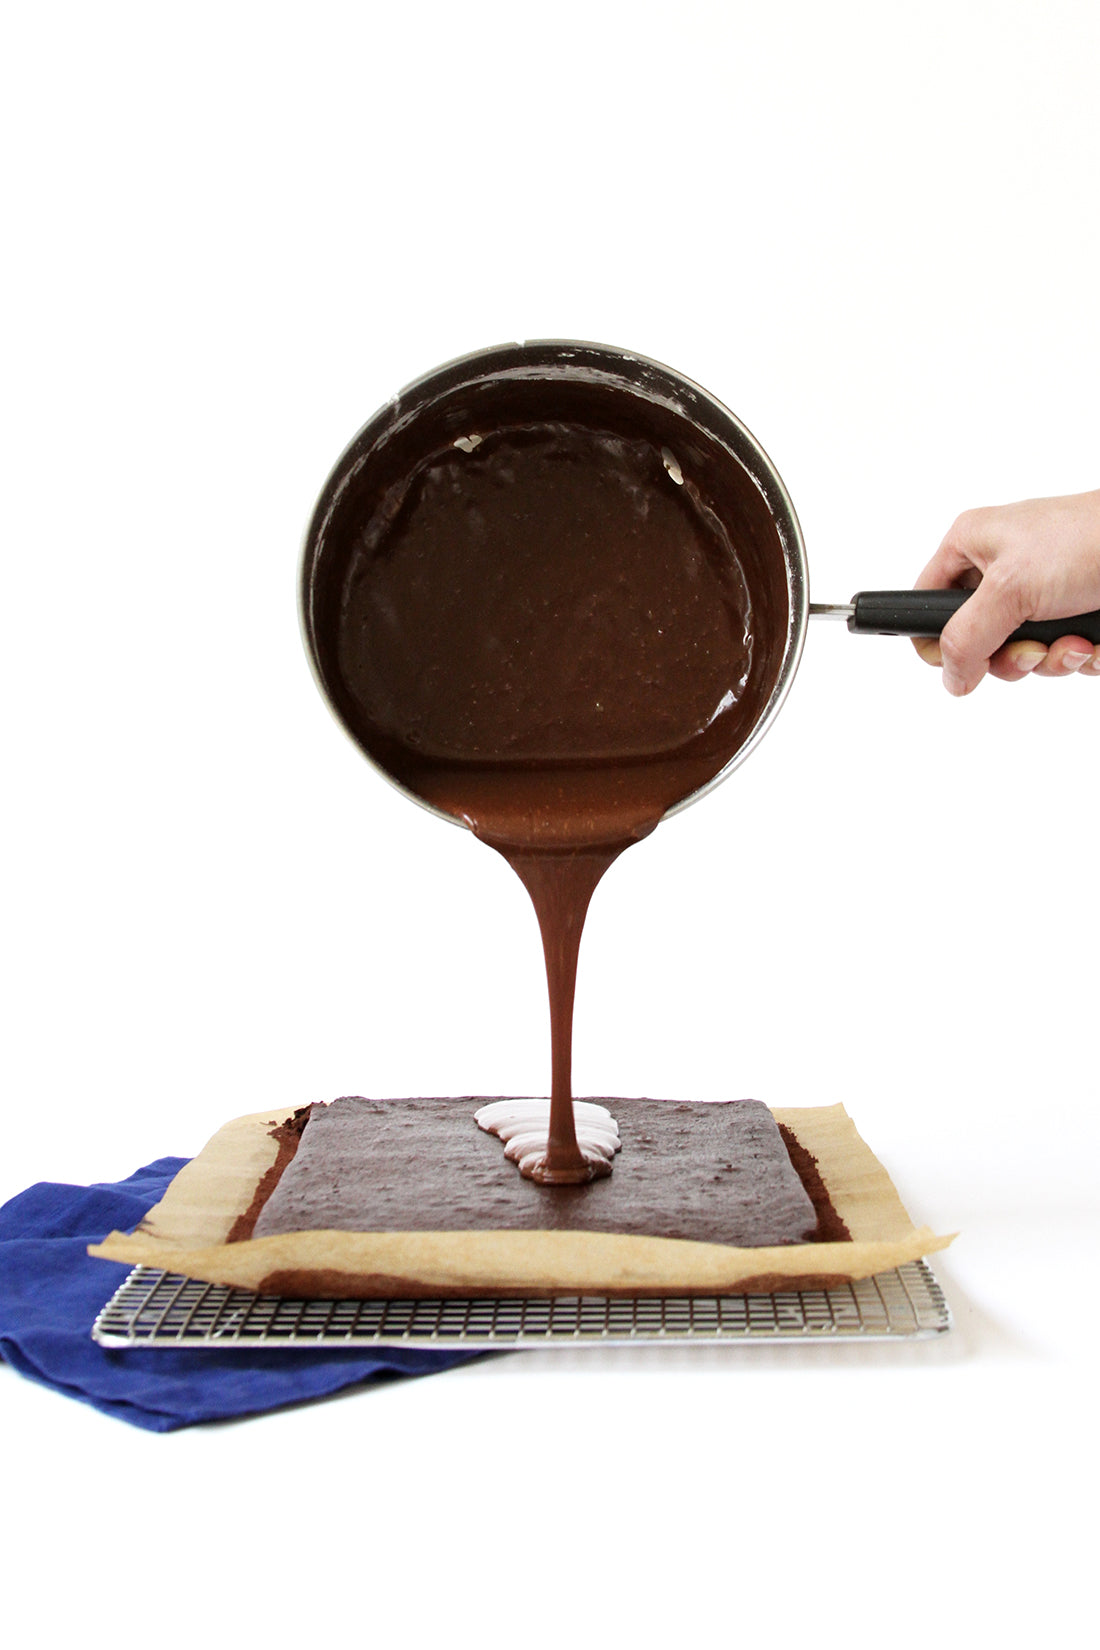 Image from the side of a hand pouring chocolate glaze onto Miss Jones Baking Co Sarah's Texas Sheet Cake on a baking rack